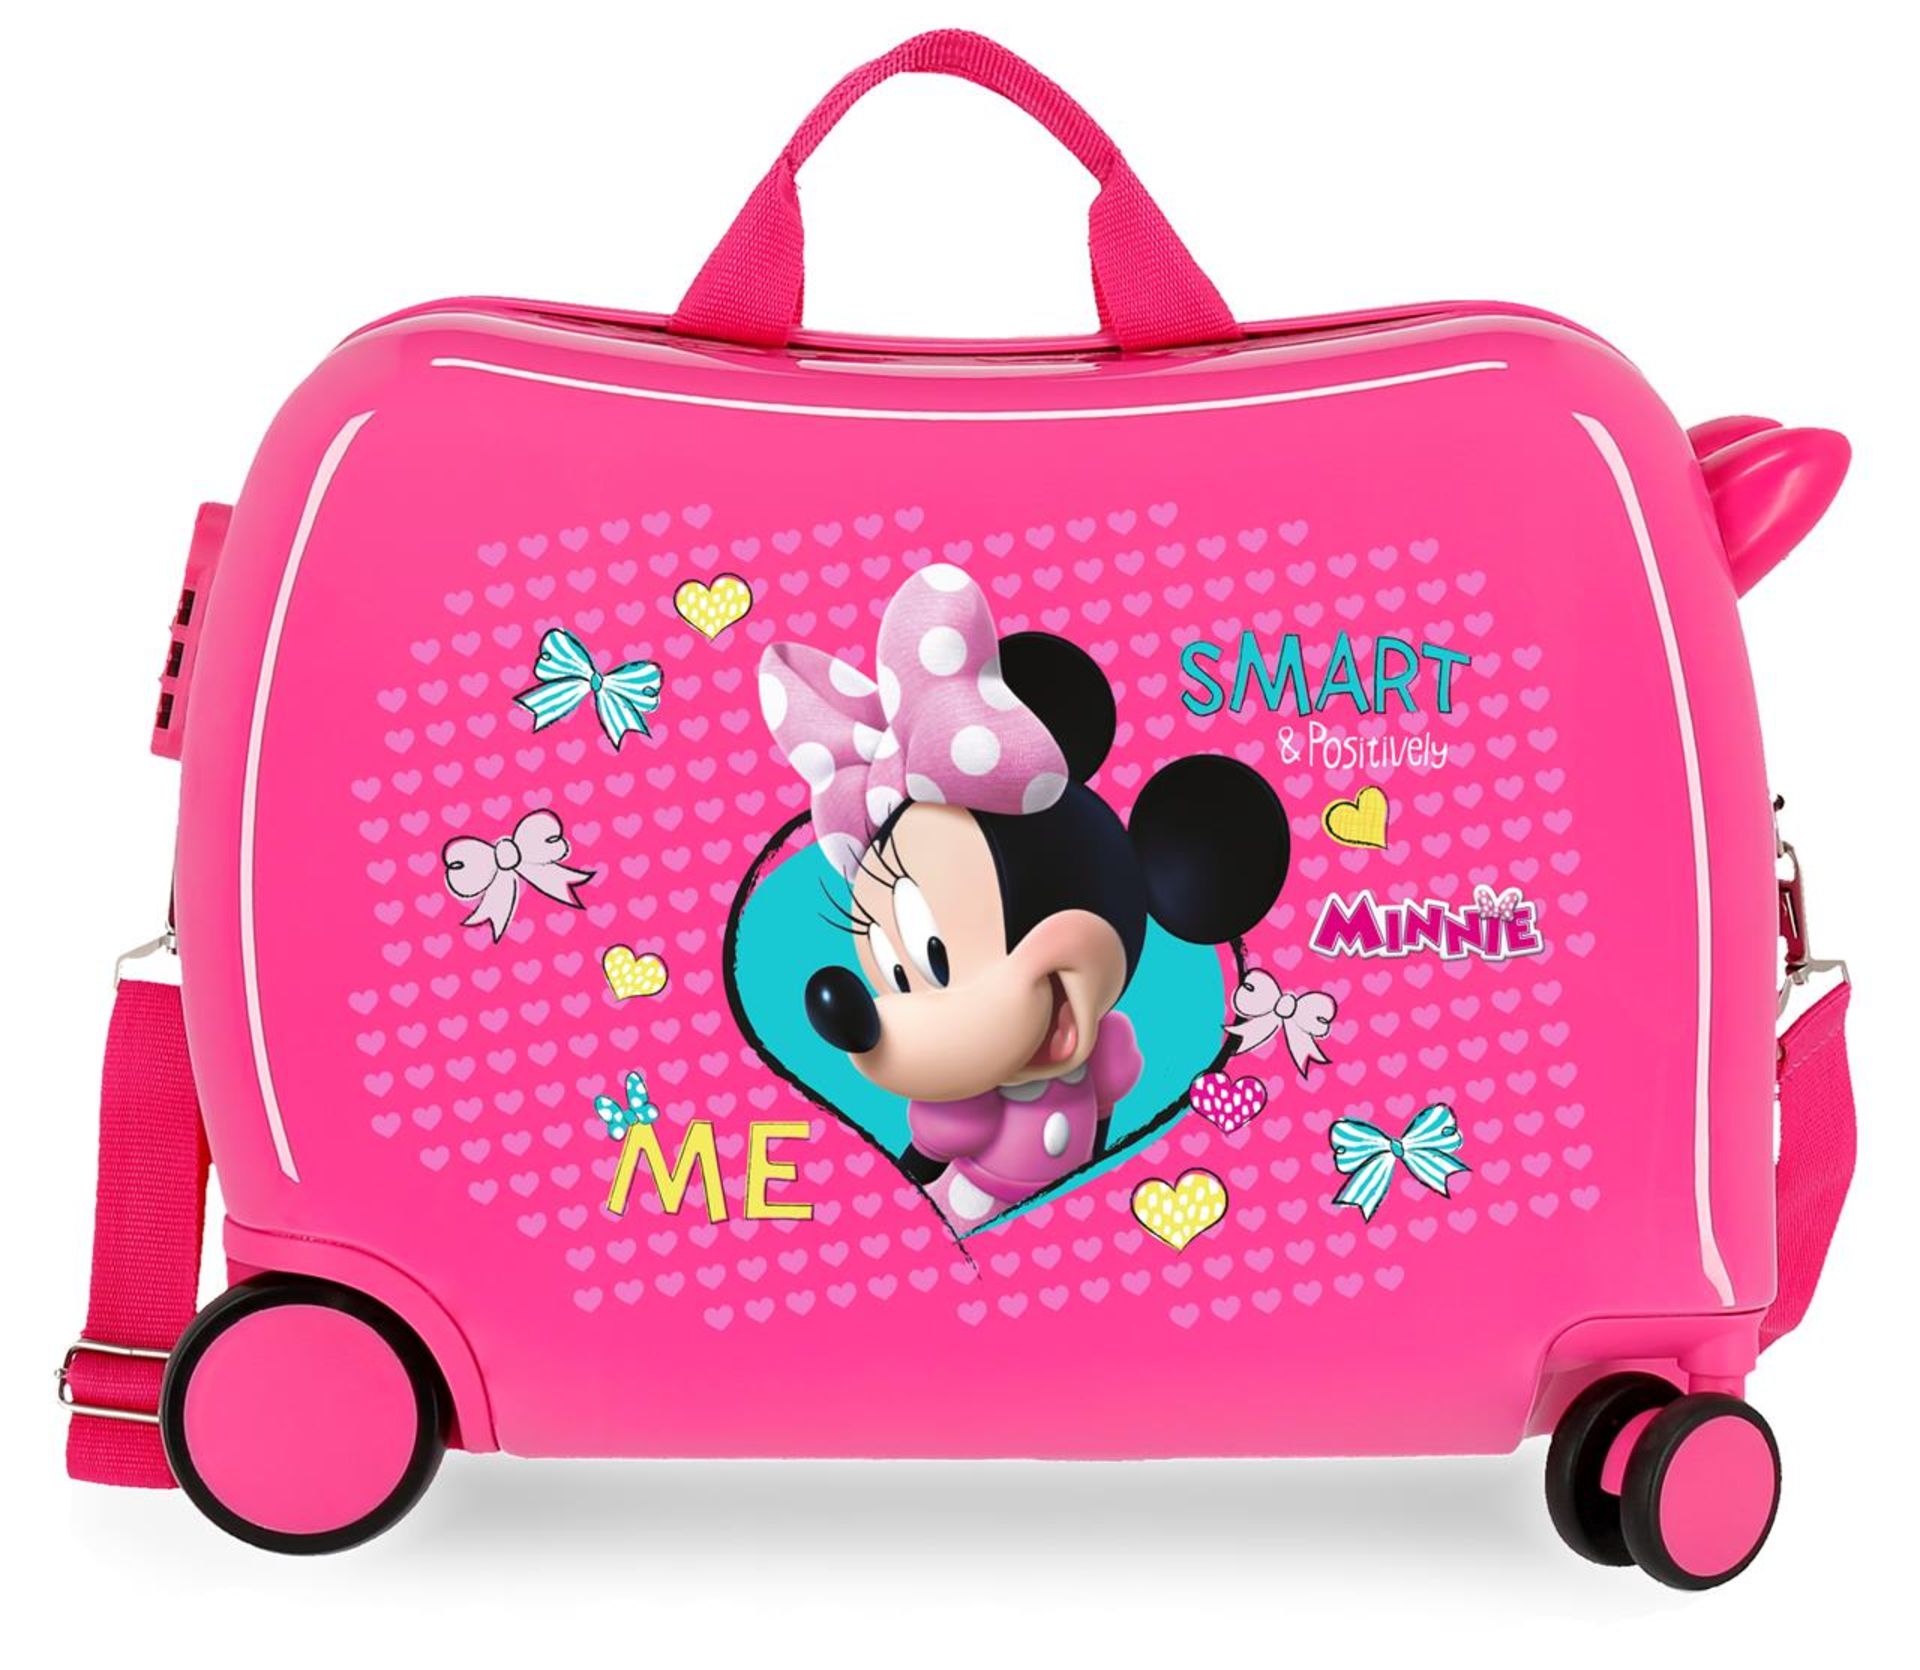 Pallet Of 48 Joumma Bags Rolling Suitcases In Various Disney Designs And Colours 50X38X20 Cm - Image 2 of 102